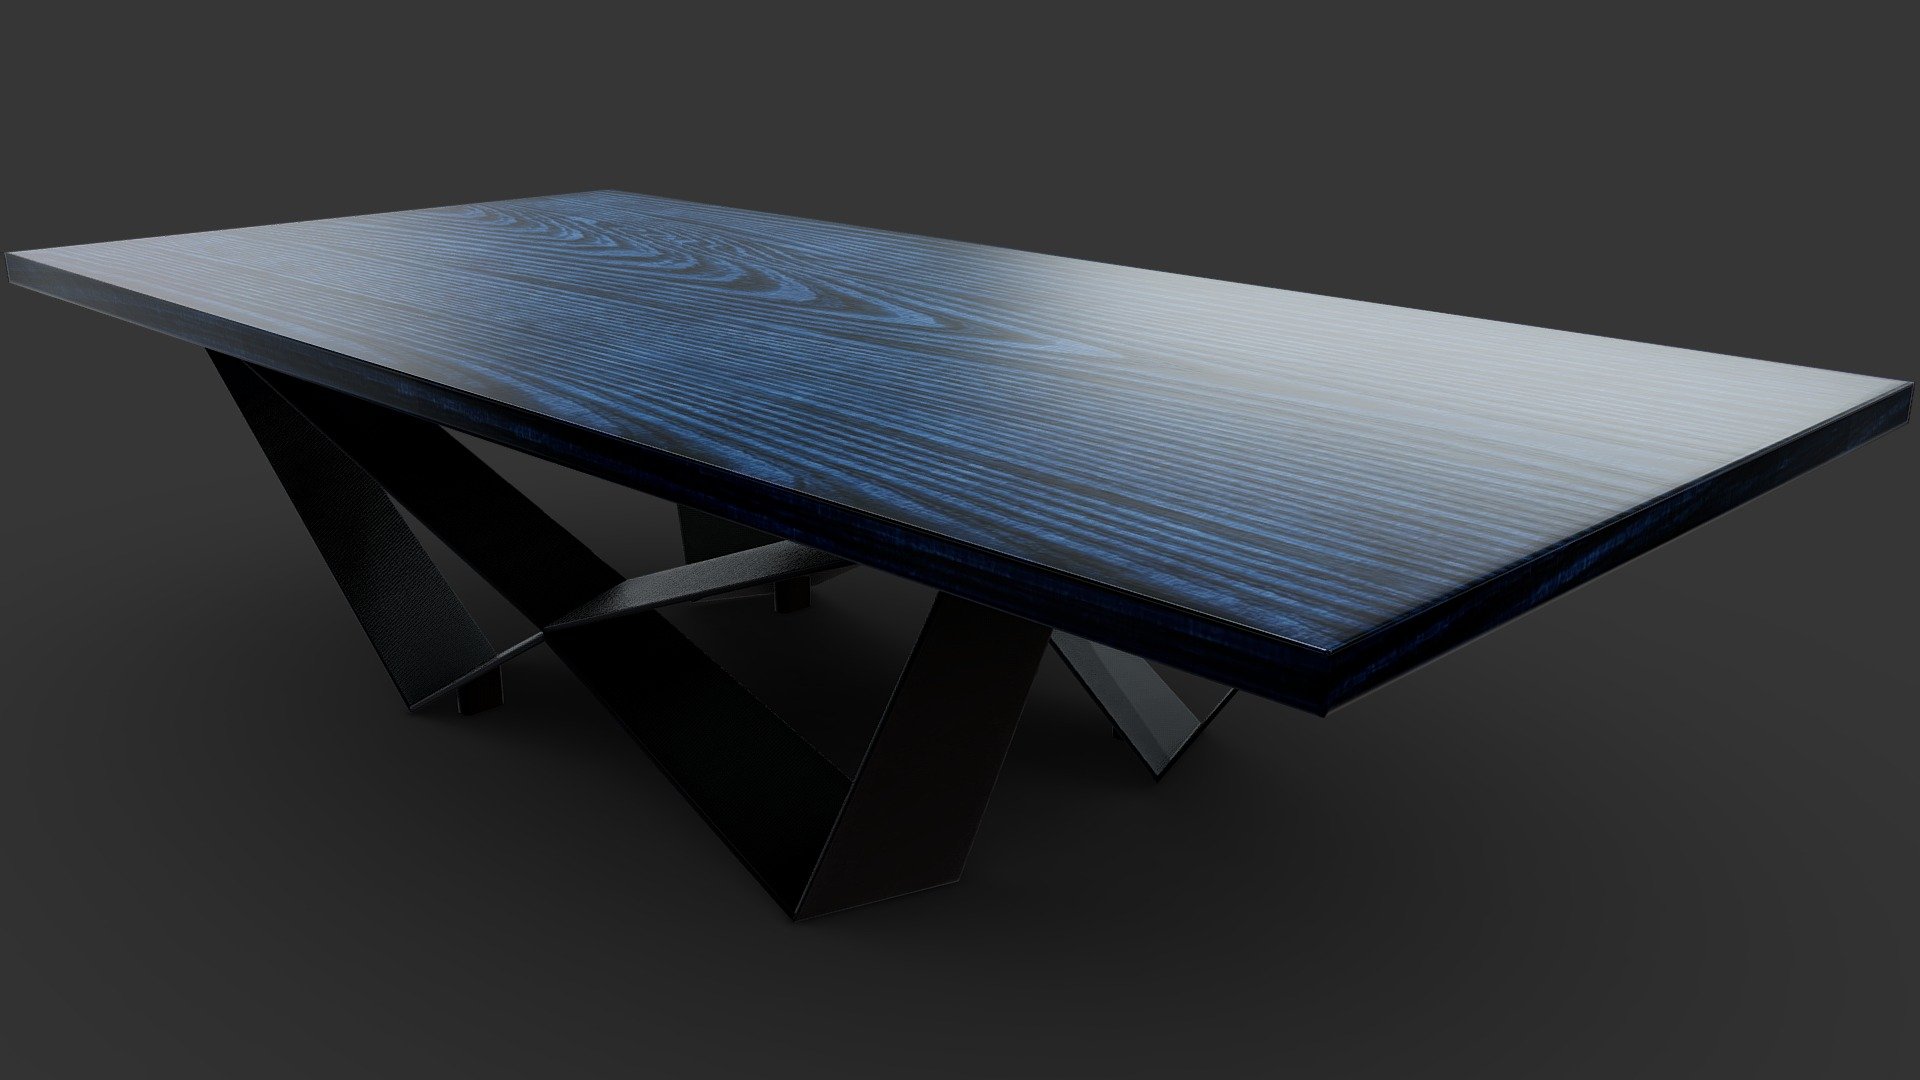 Blue wooden table with some semi-futuristic legs

Made in Blender, textured in Substance Painter 3d model